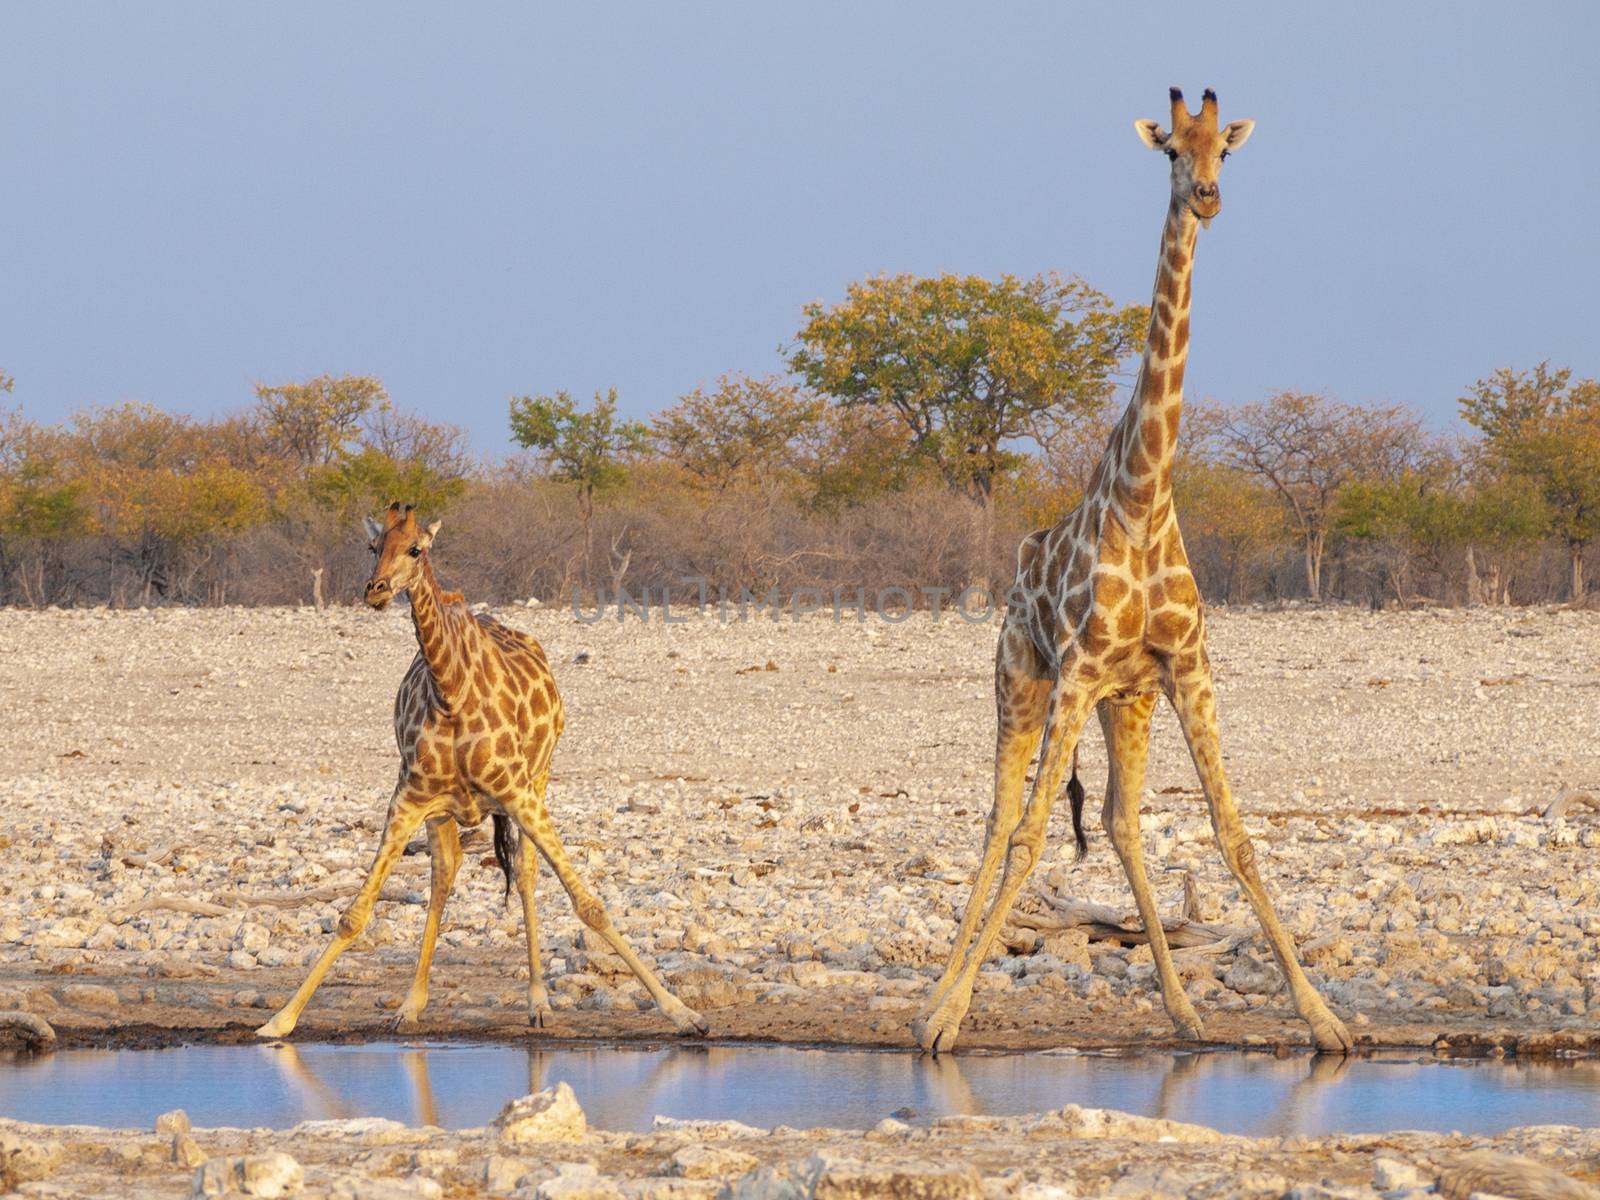 Giraffes drinking water at sunset in the Etosha National Park in Namibia. by maramade